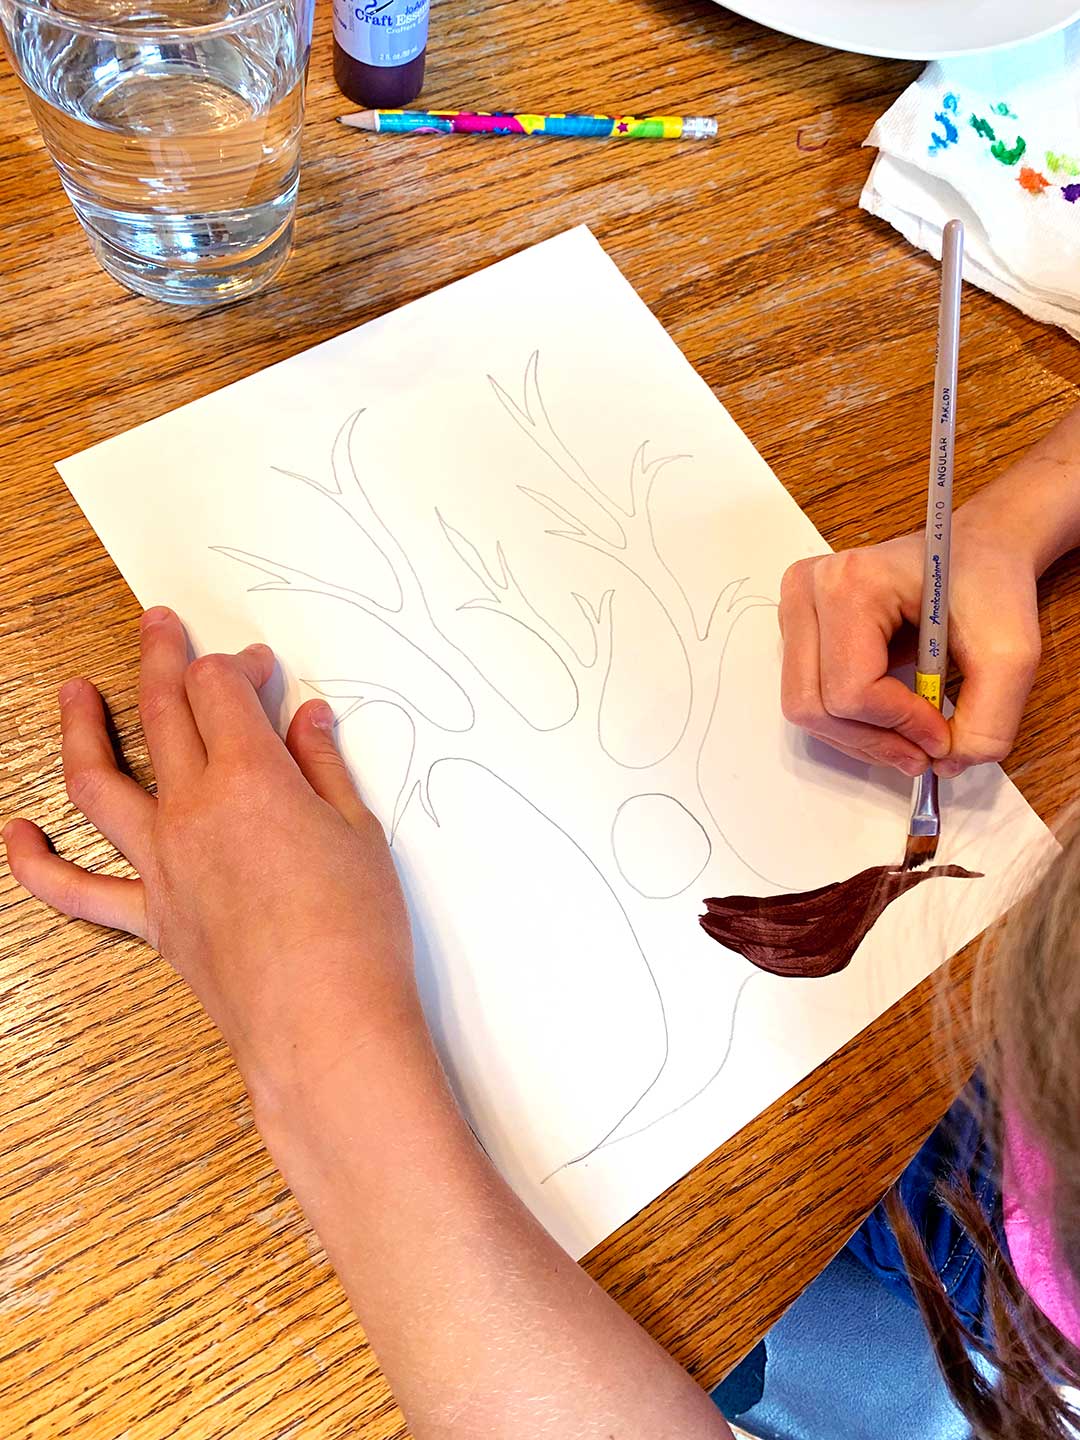 Child paints the trunk of a tree sketch at a kitchen table.